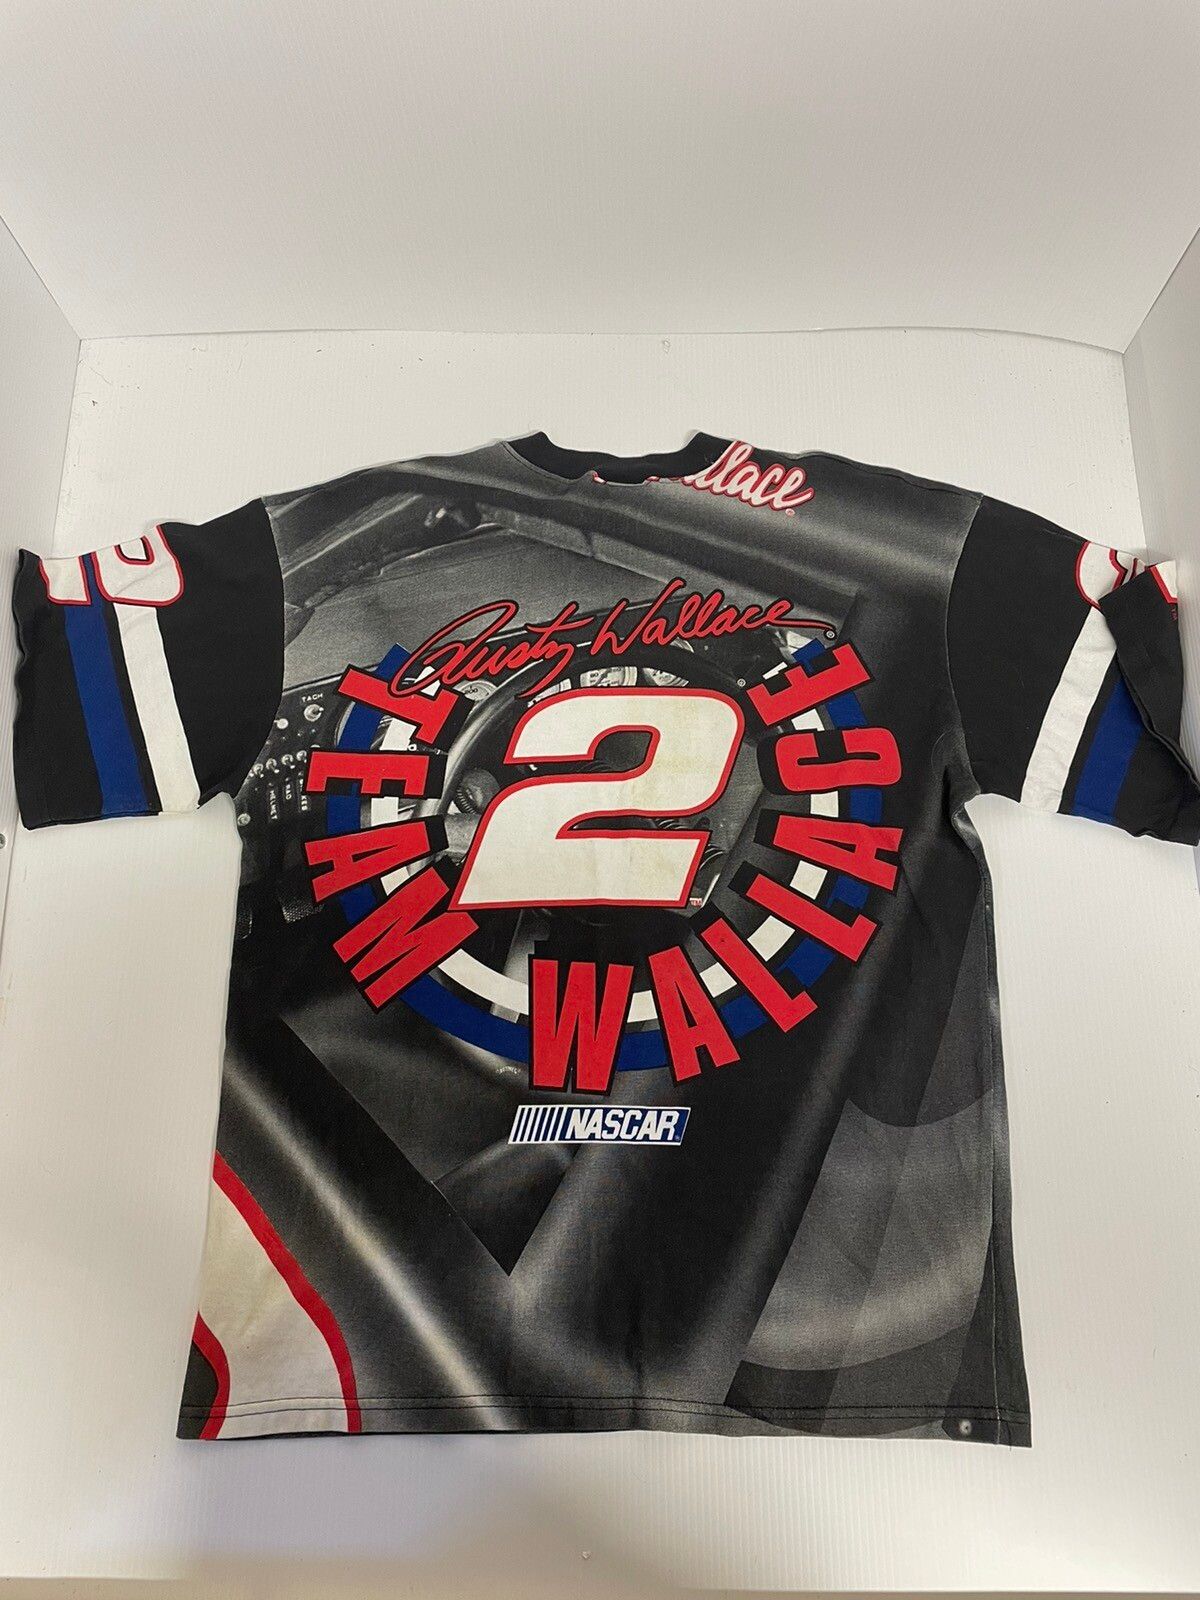 Chase Authentics Miller Lite Wallace Ford All Over Print Nascar Shirt Size XL Size US XL / EU 56 / 4 - 2 Preview